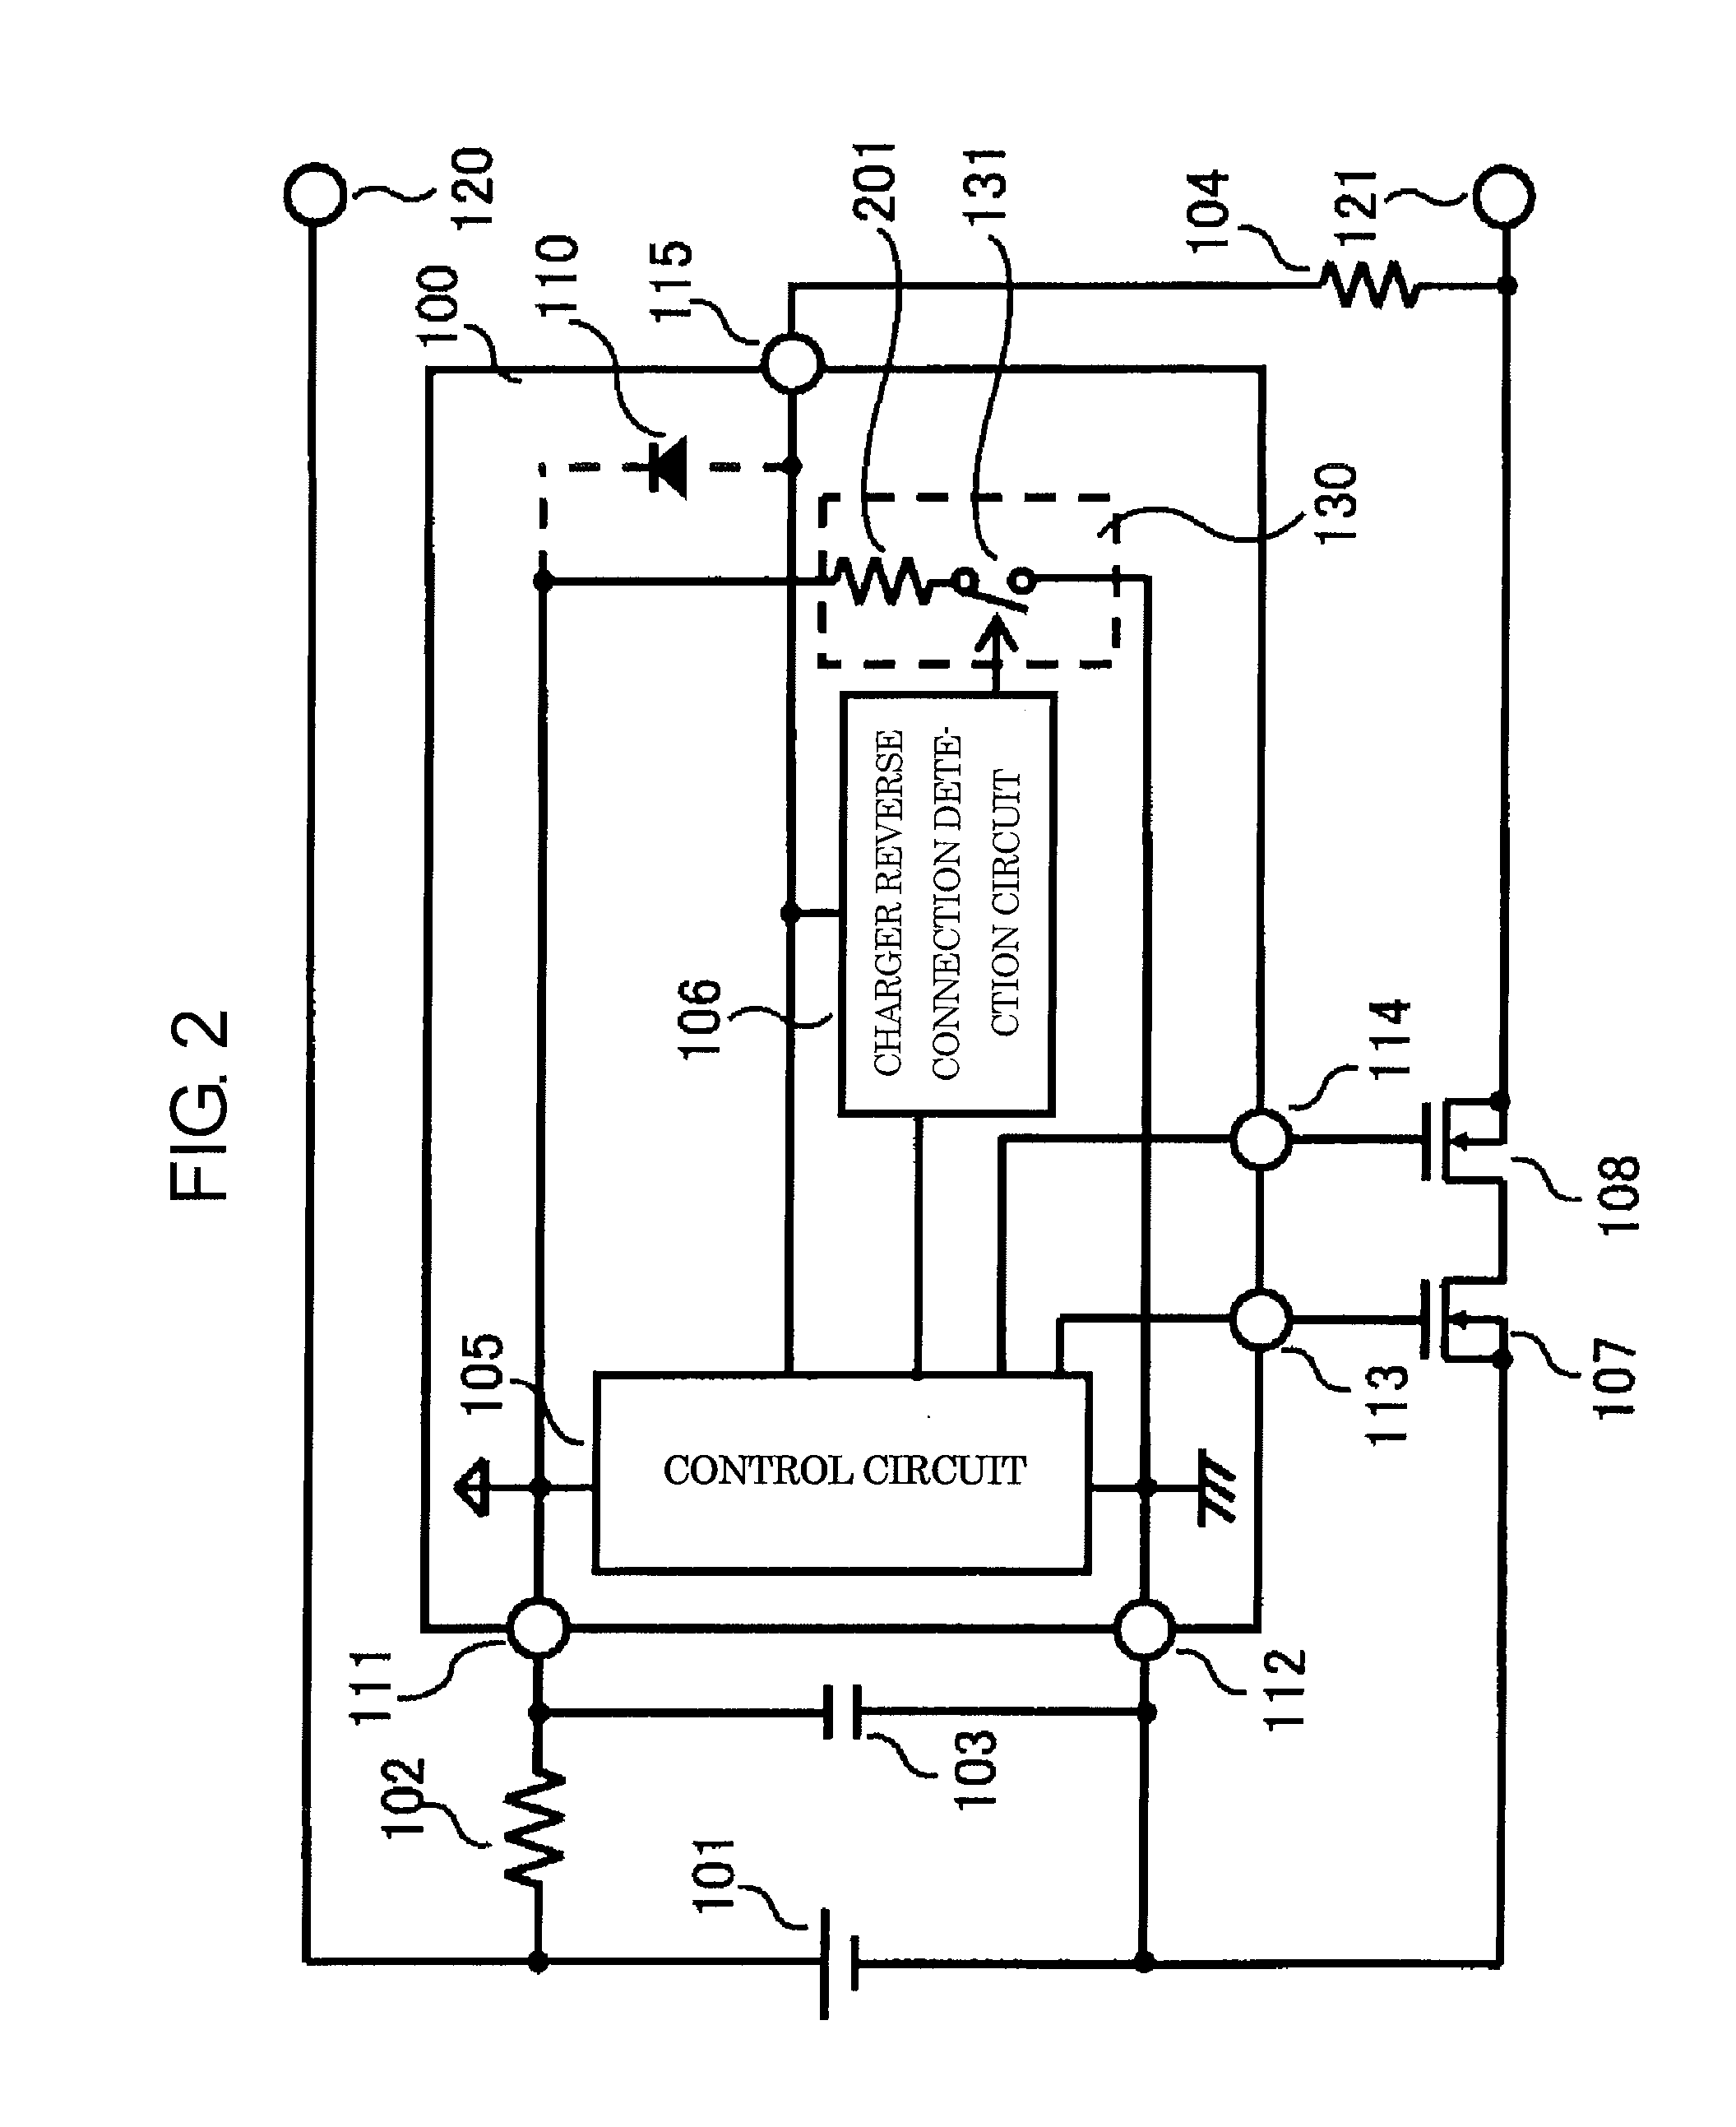 Charge and discharge control circuit and battery device